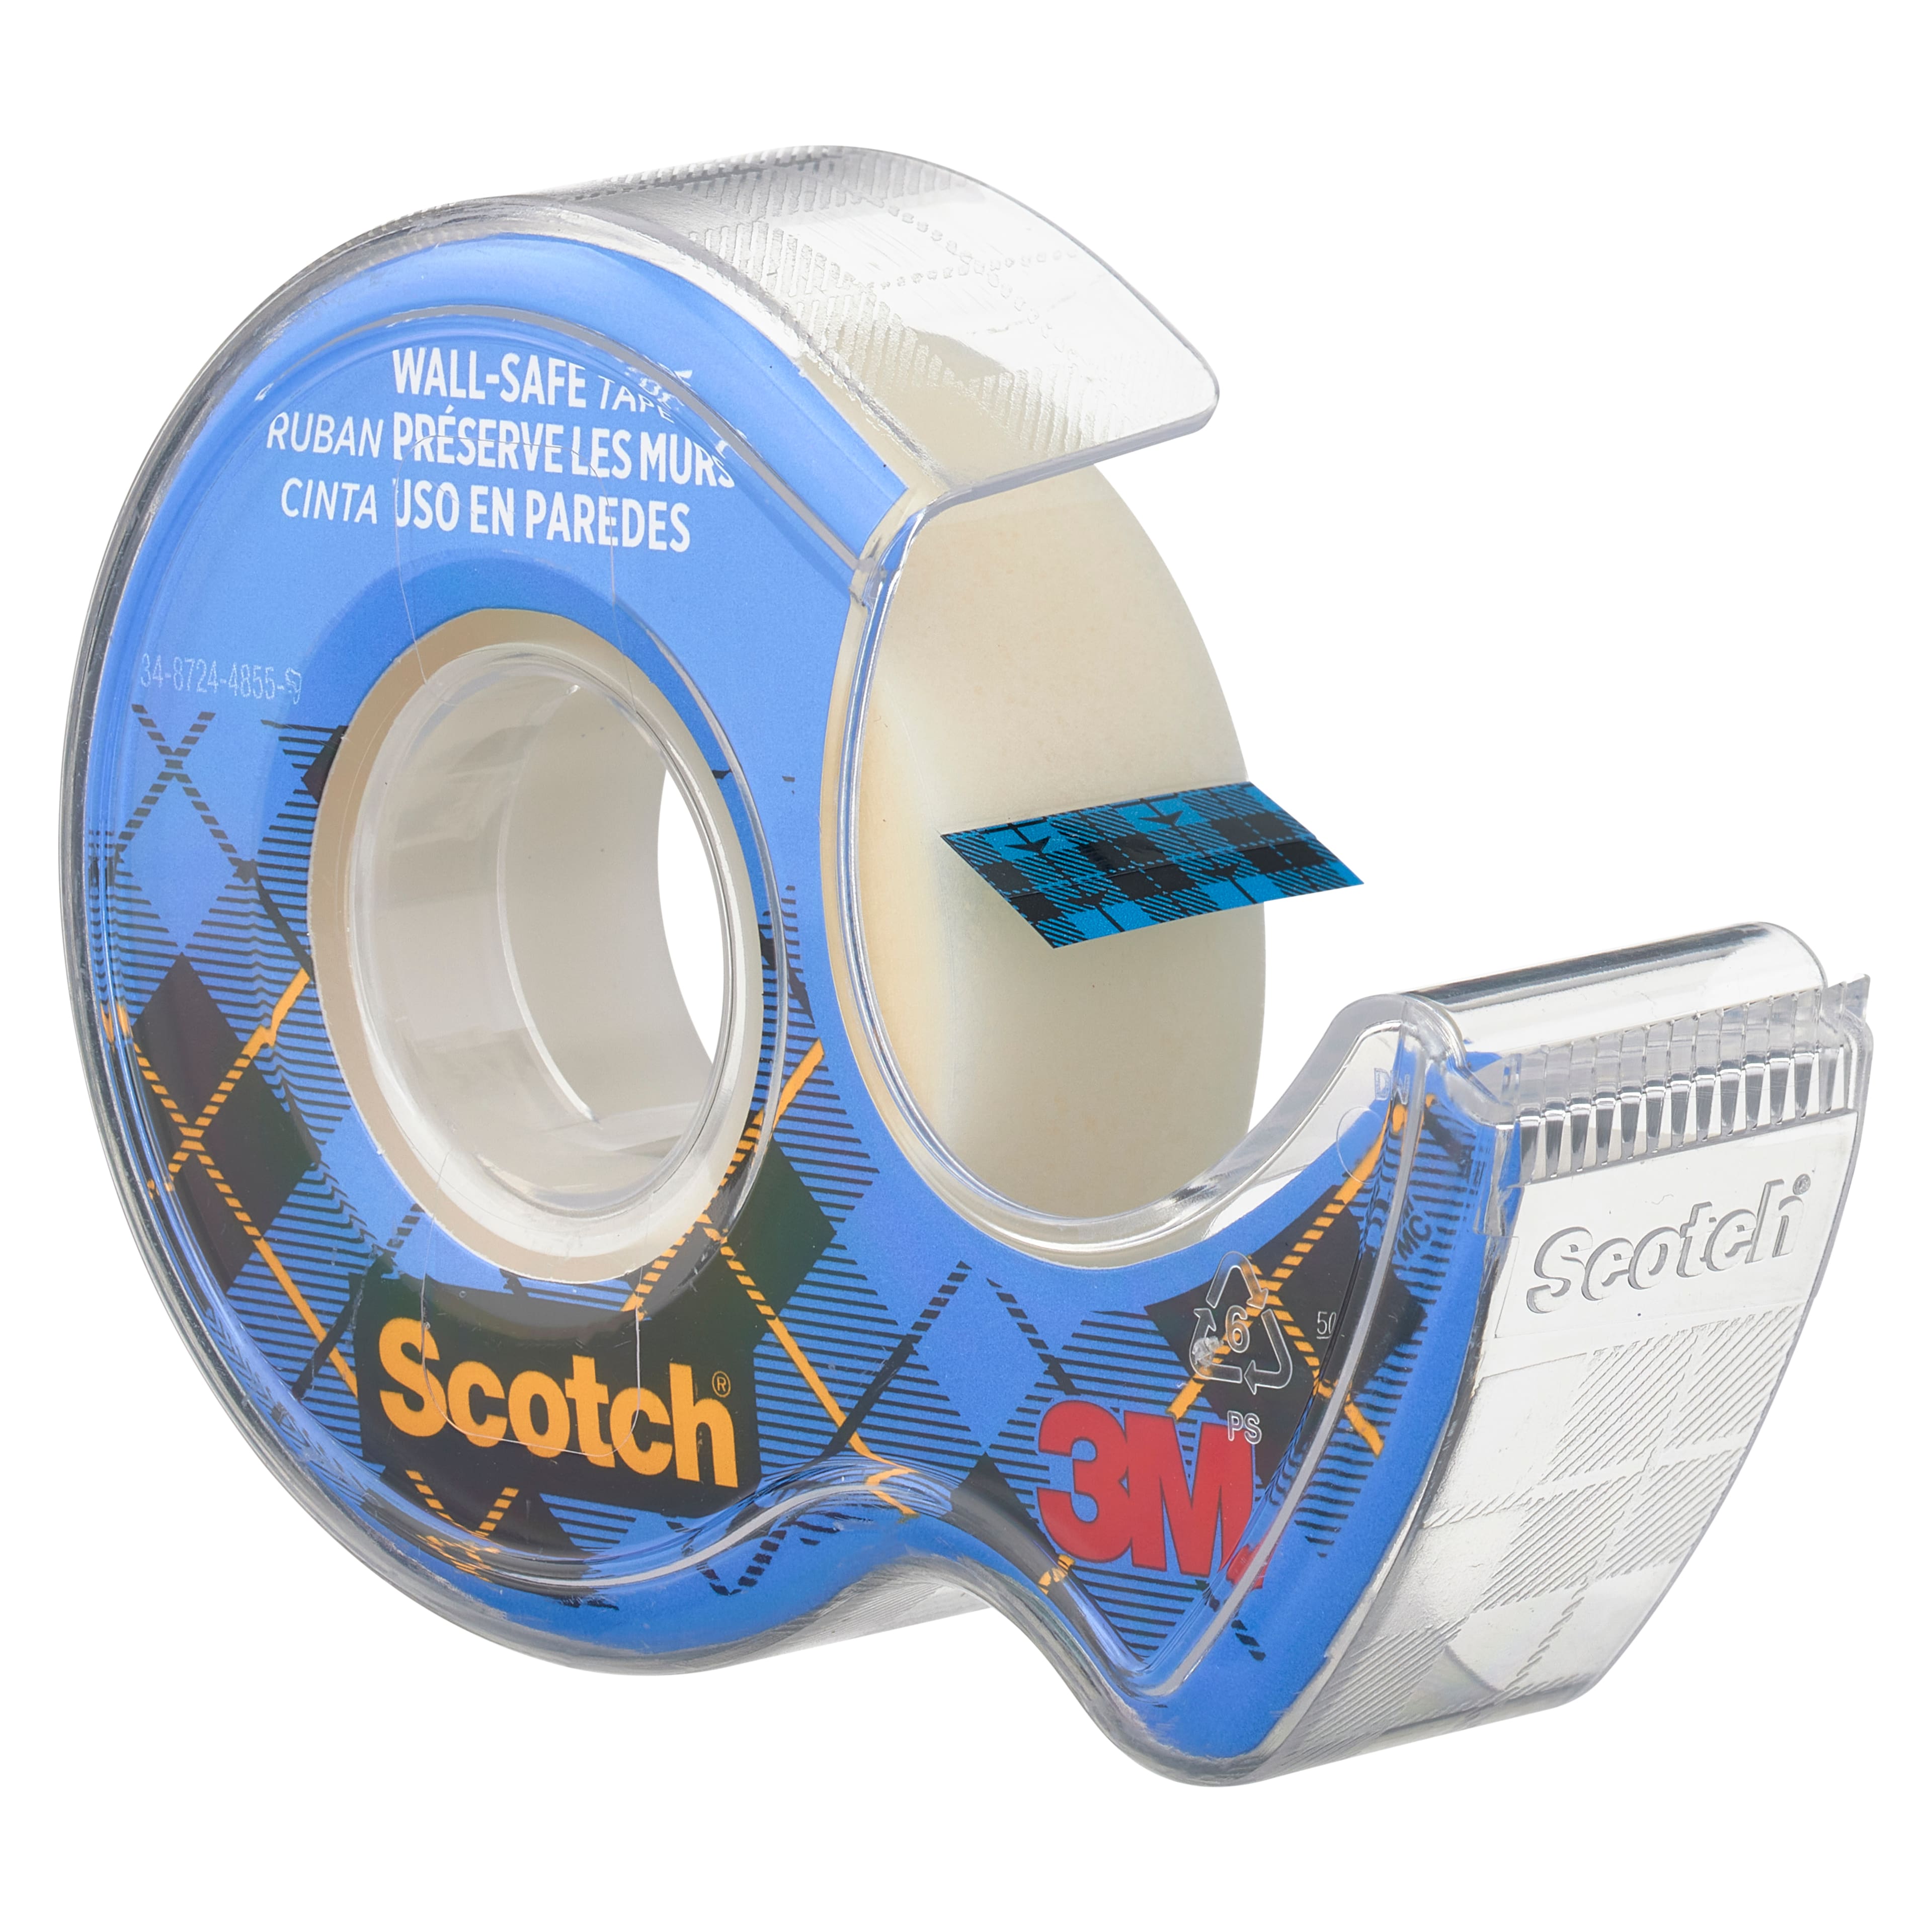 Great Value, Scotch® Wall-Safe Tape With Dispenser, 1 Core, 0.75